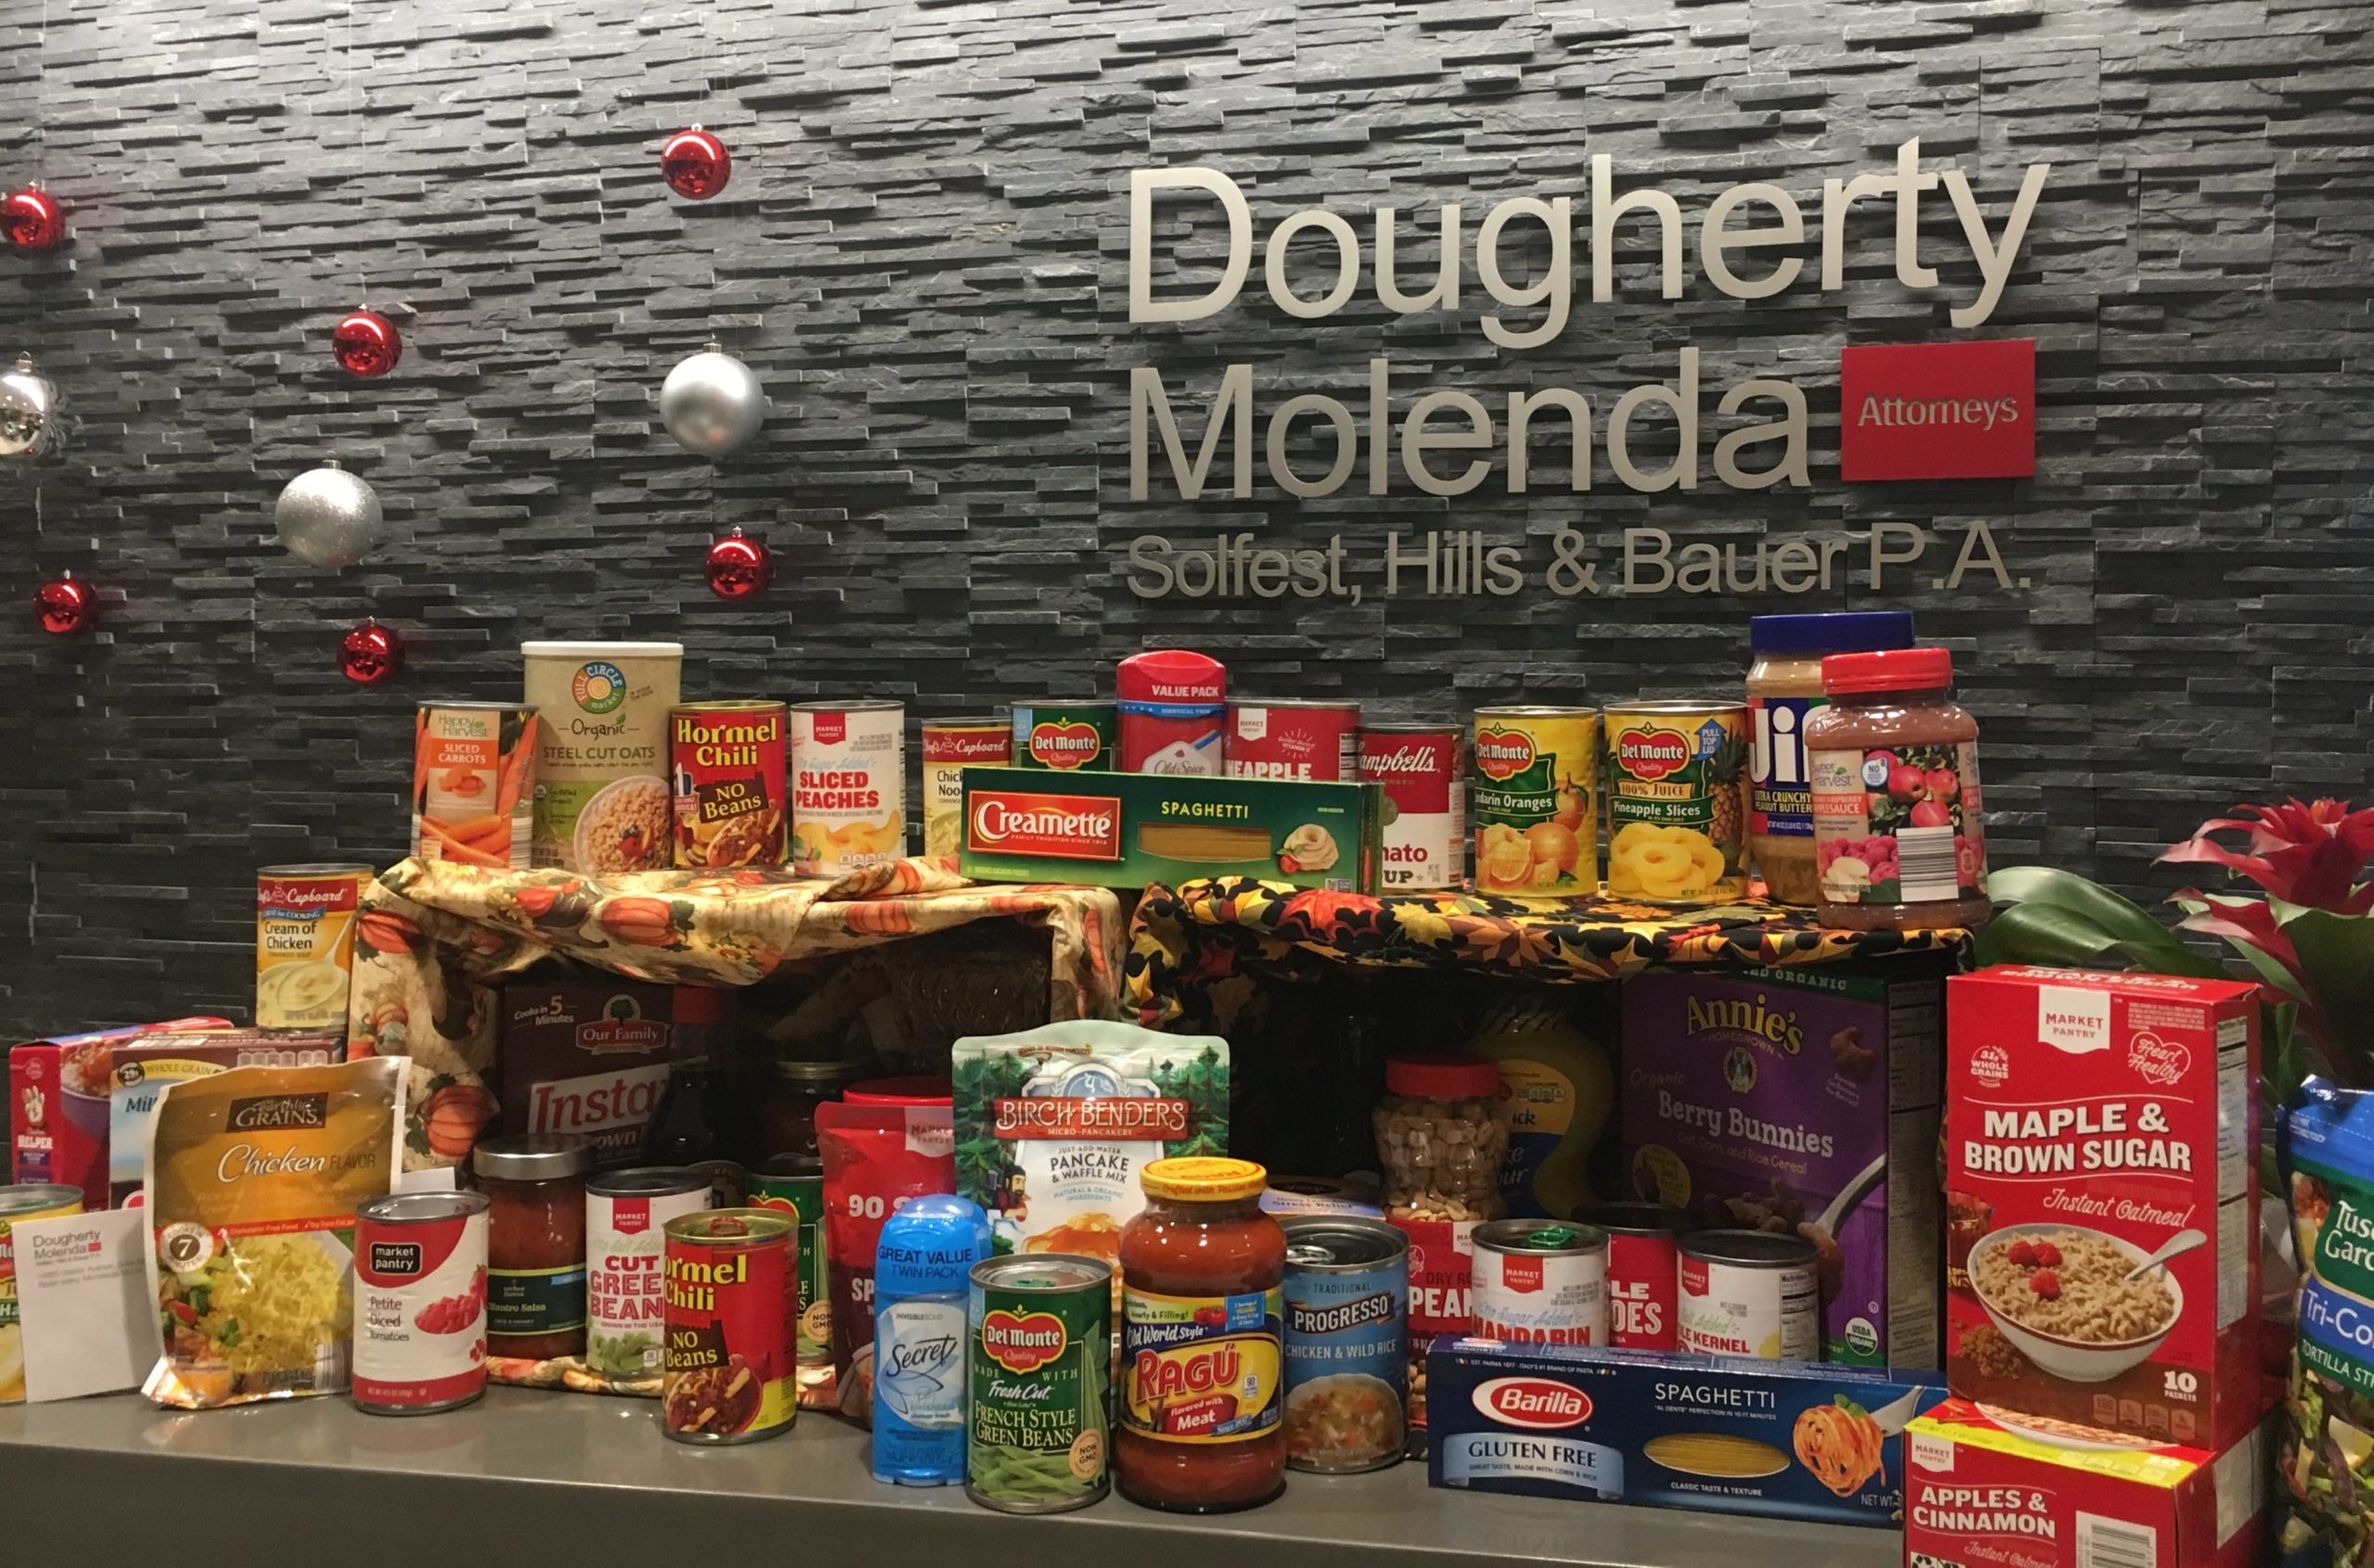 Photo of the local food shelf at Dougherty, Molenda, Solfest, Hills & Bauer P.A. for donation.